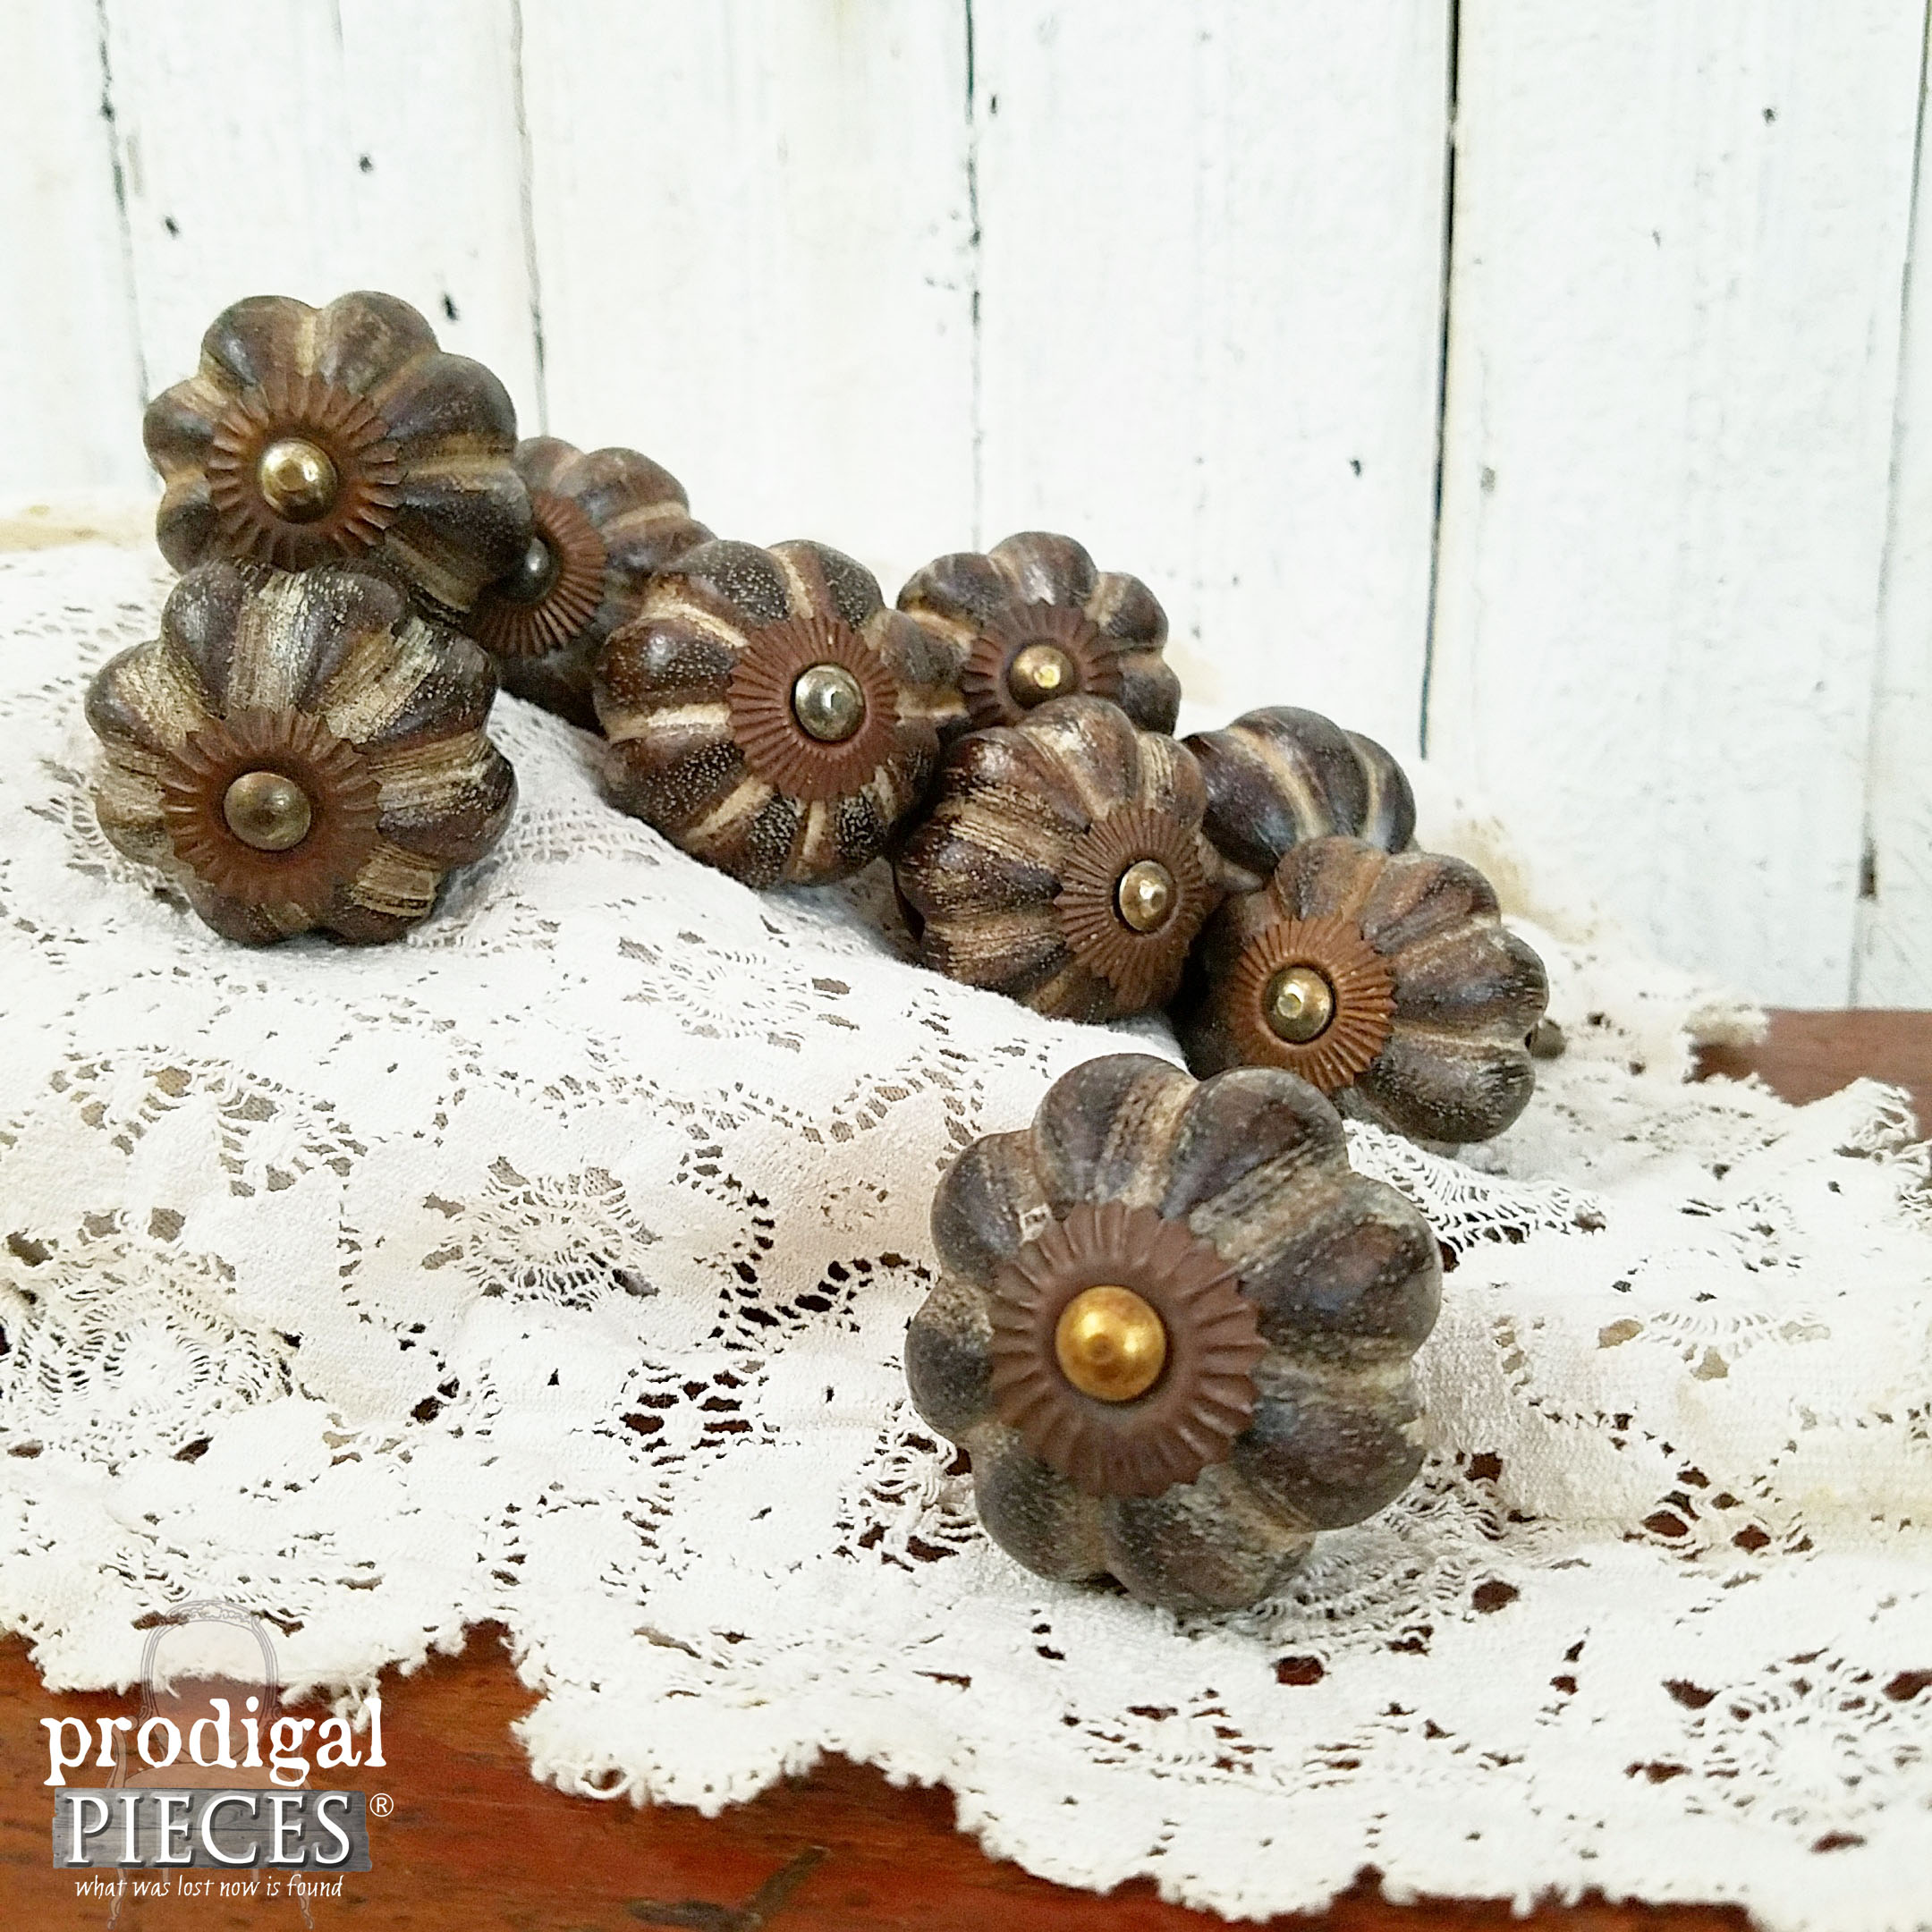 Wooden Melon Furniture Knobs by Rustic Brands | Prodigal Pieces | www.prodigalpieces.com